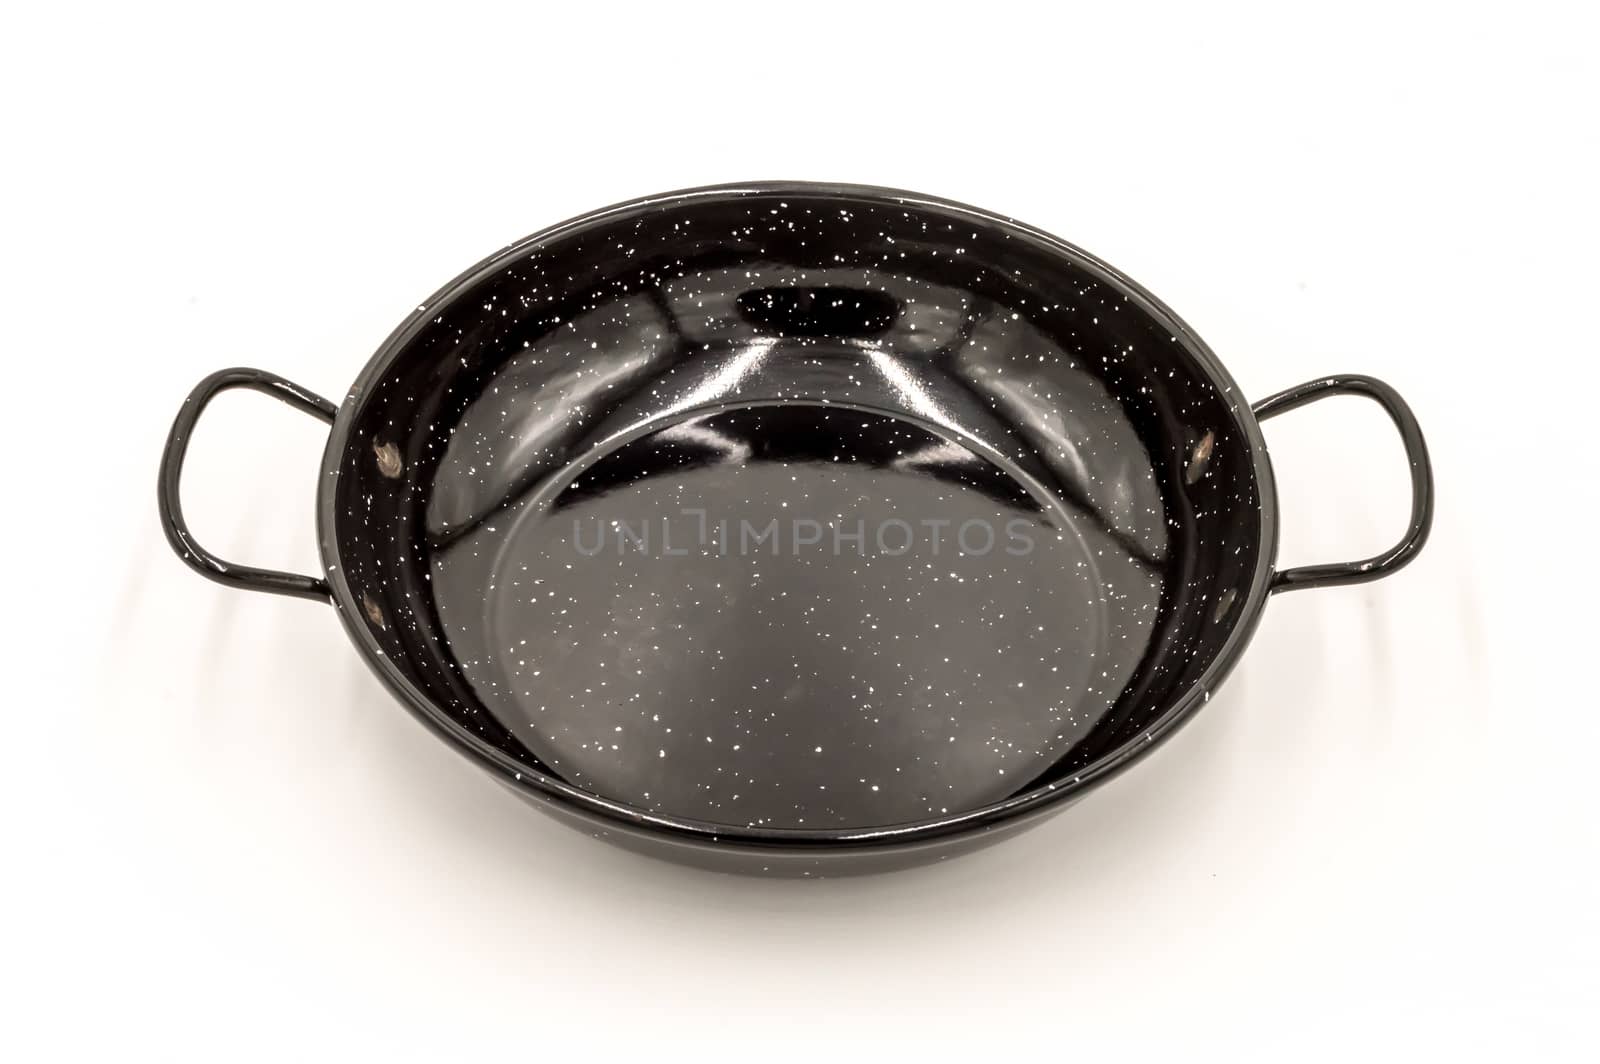 Empty paella pan on a white background by Philou1000